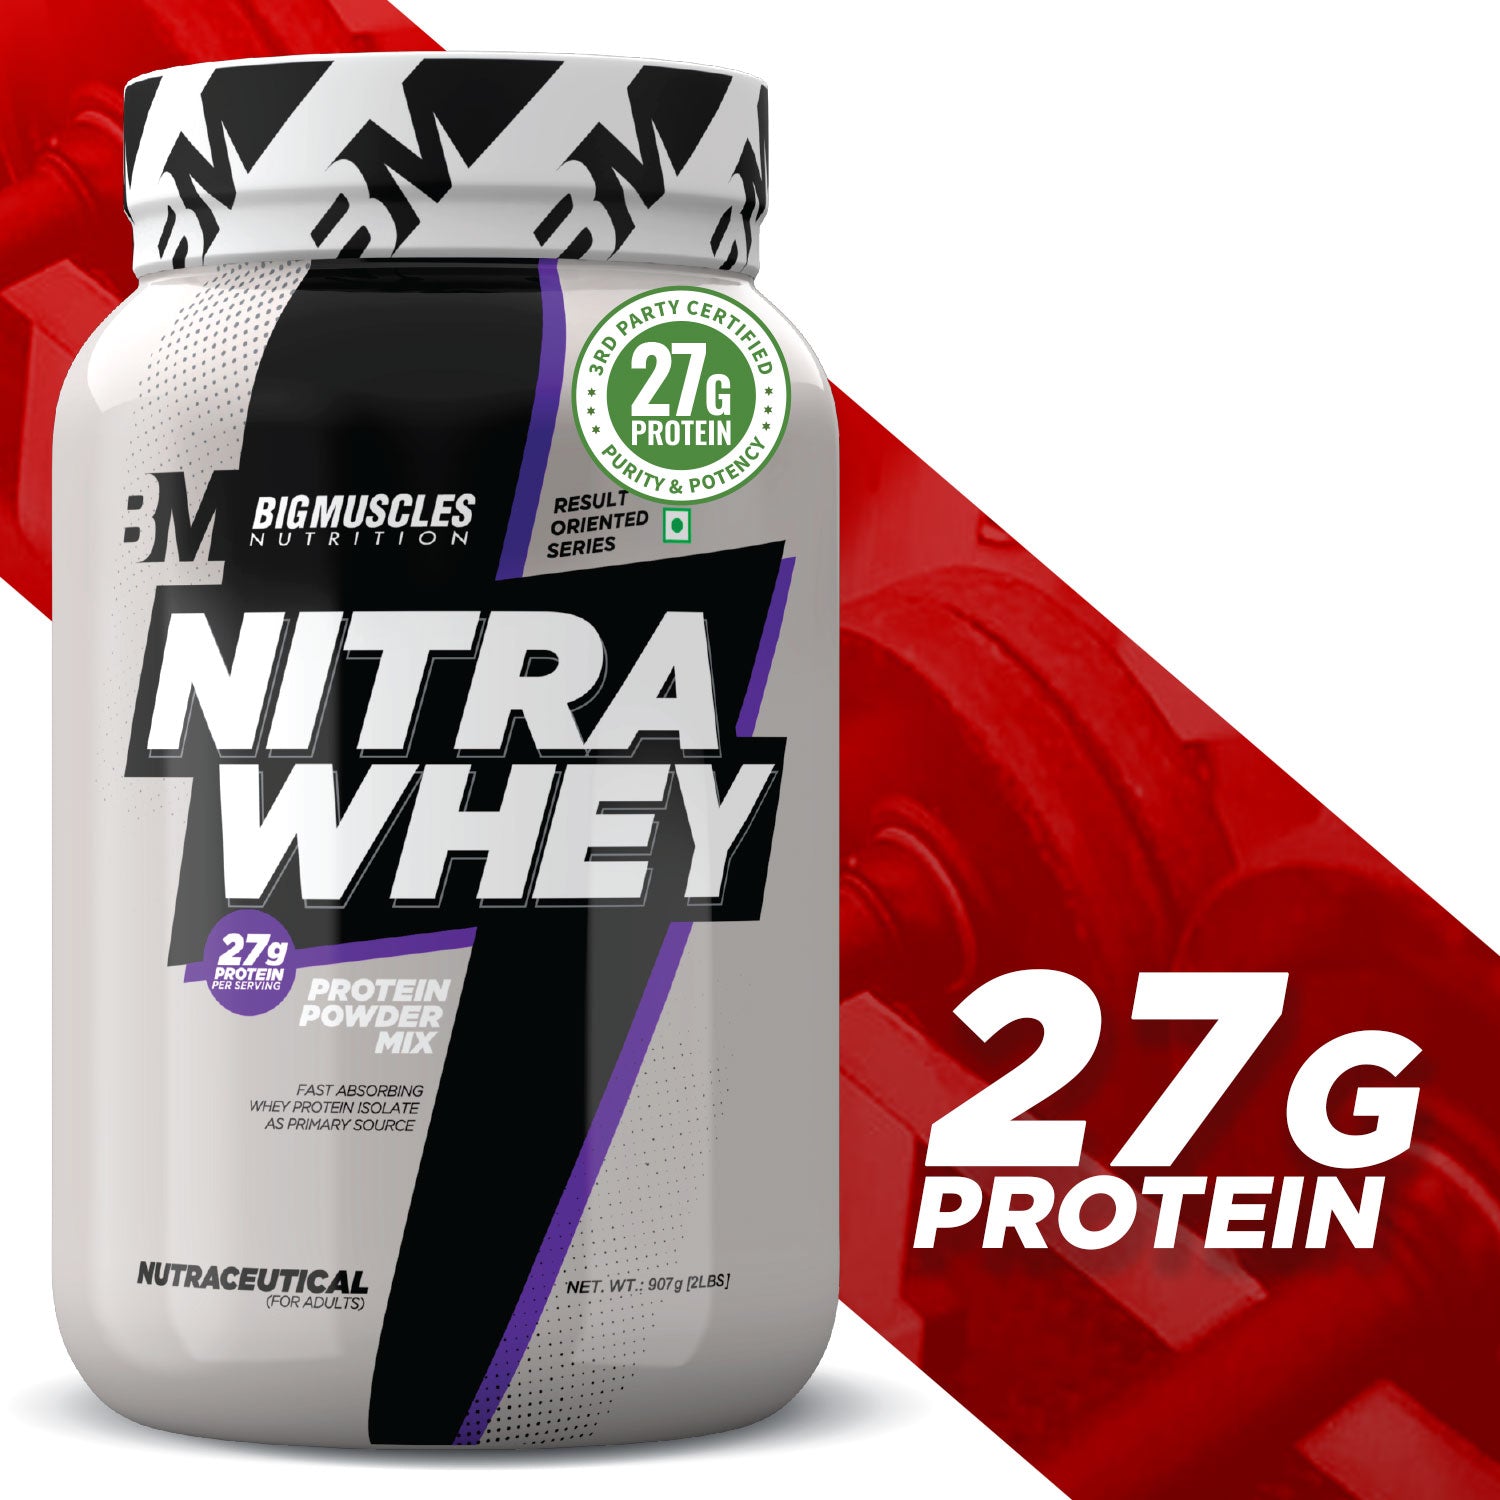 Protimuscle 5 - Nutrimuscle - 4 kg